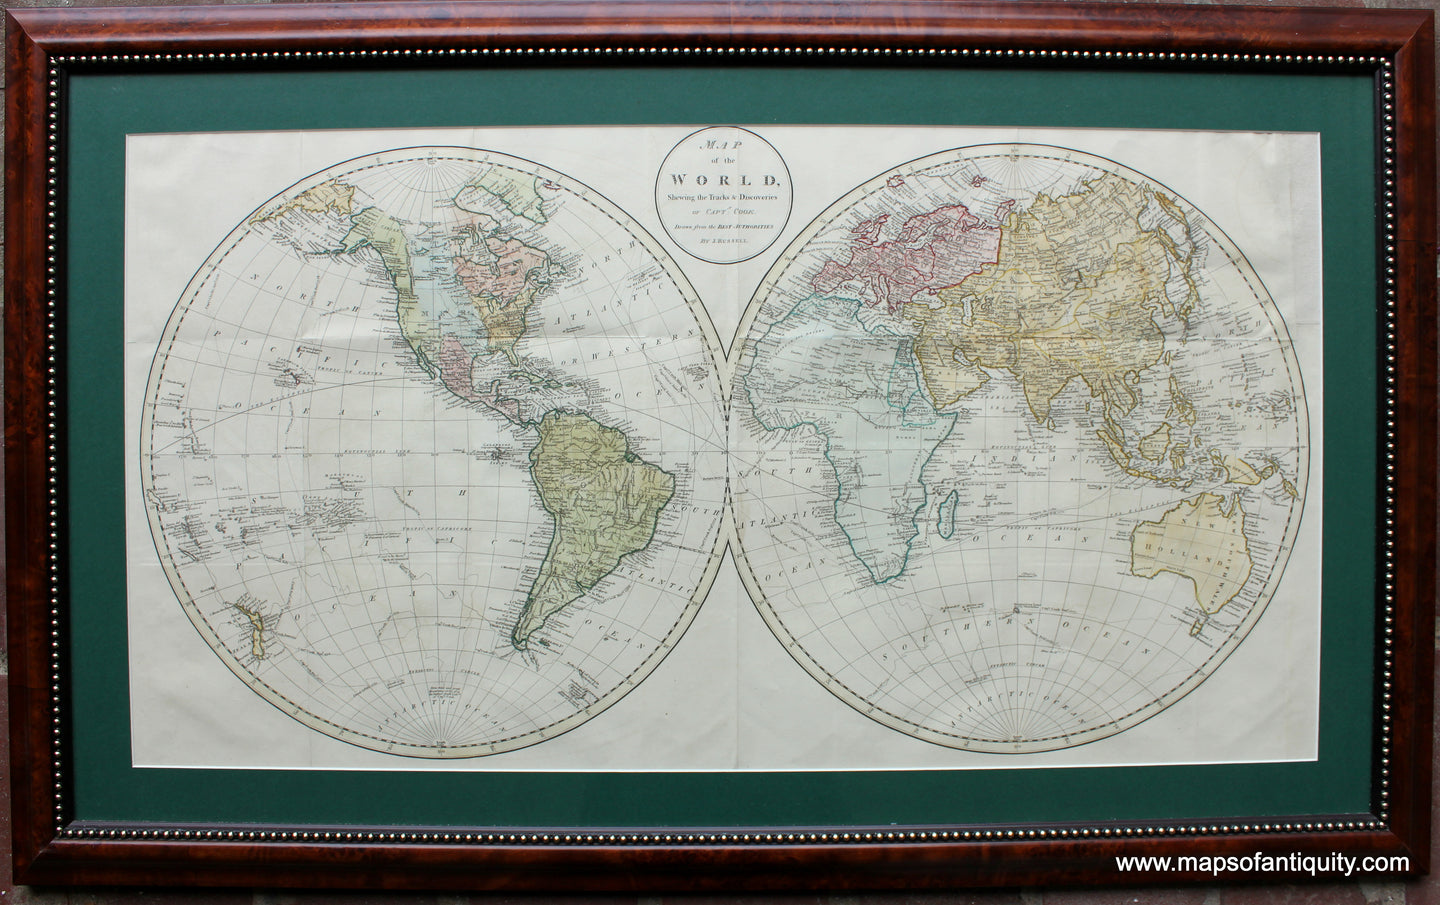 Framed-Antique-Hand-Colored-Map-Map-of-the-World-Shewing-the-Tracks-&-Discoveries-of-Captain-Cook-**********-World--1799-J.-Russell-Maps-Of-Antiquity